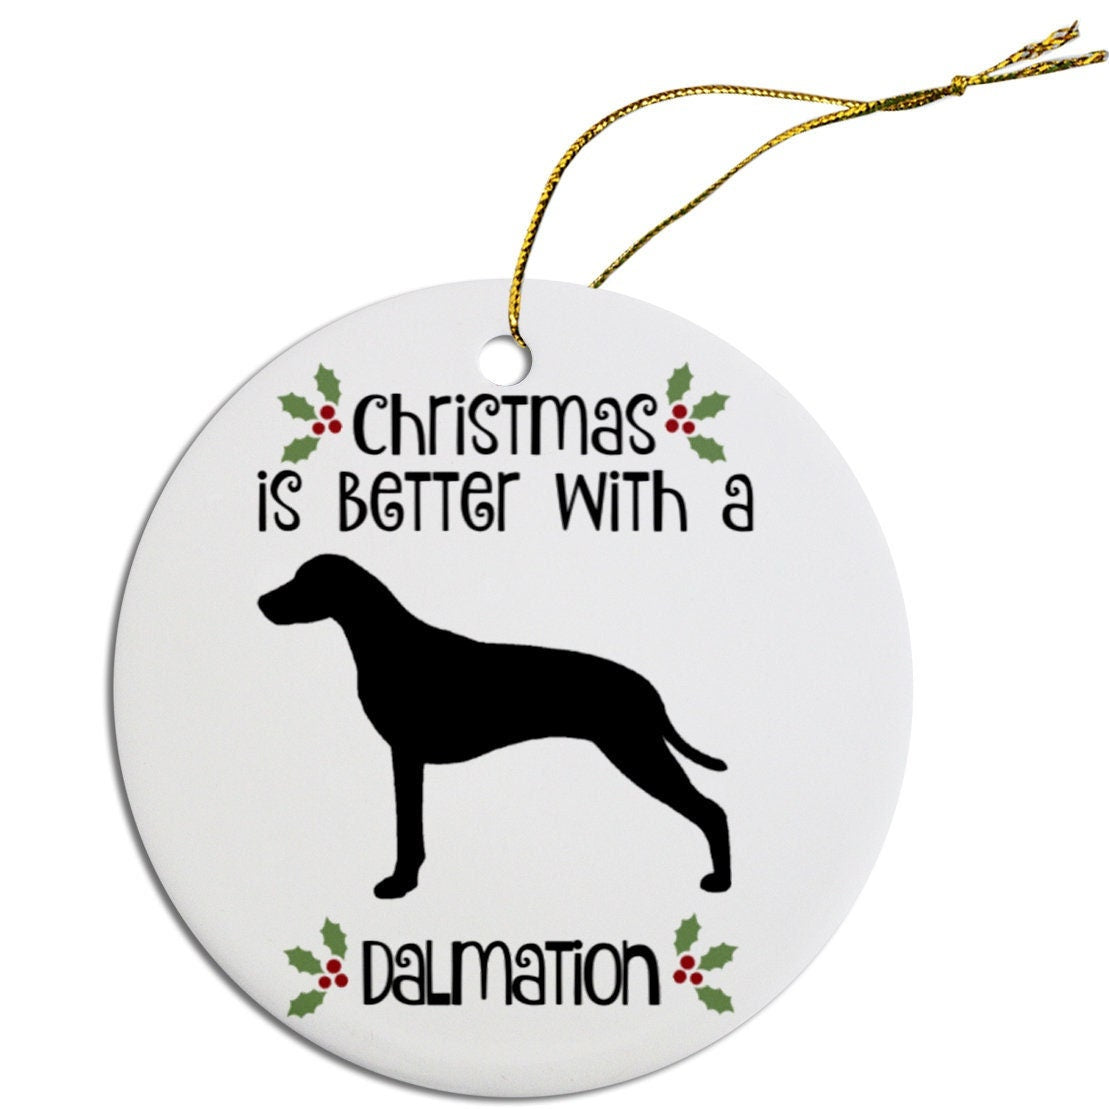 Dog Breed Specific Round Christmas Ornament, "Dalmatian"